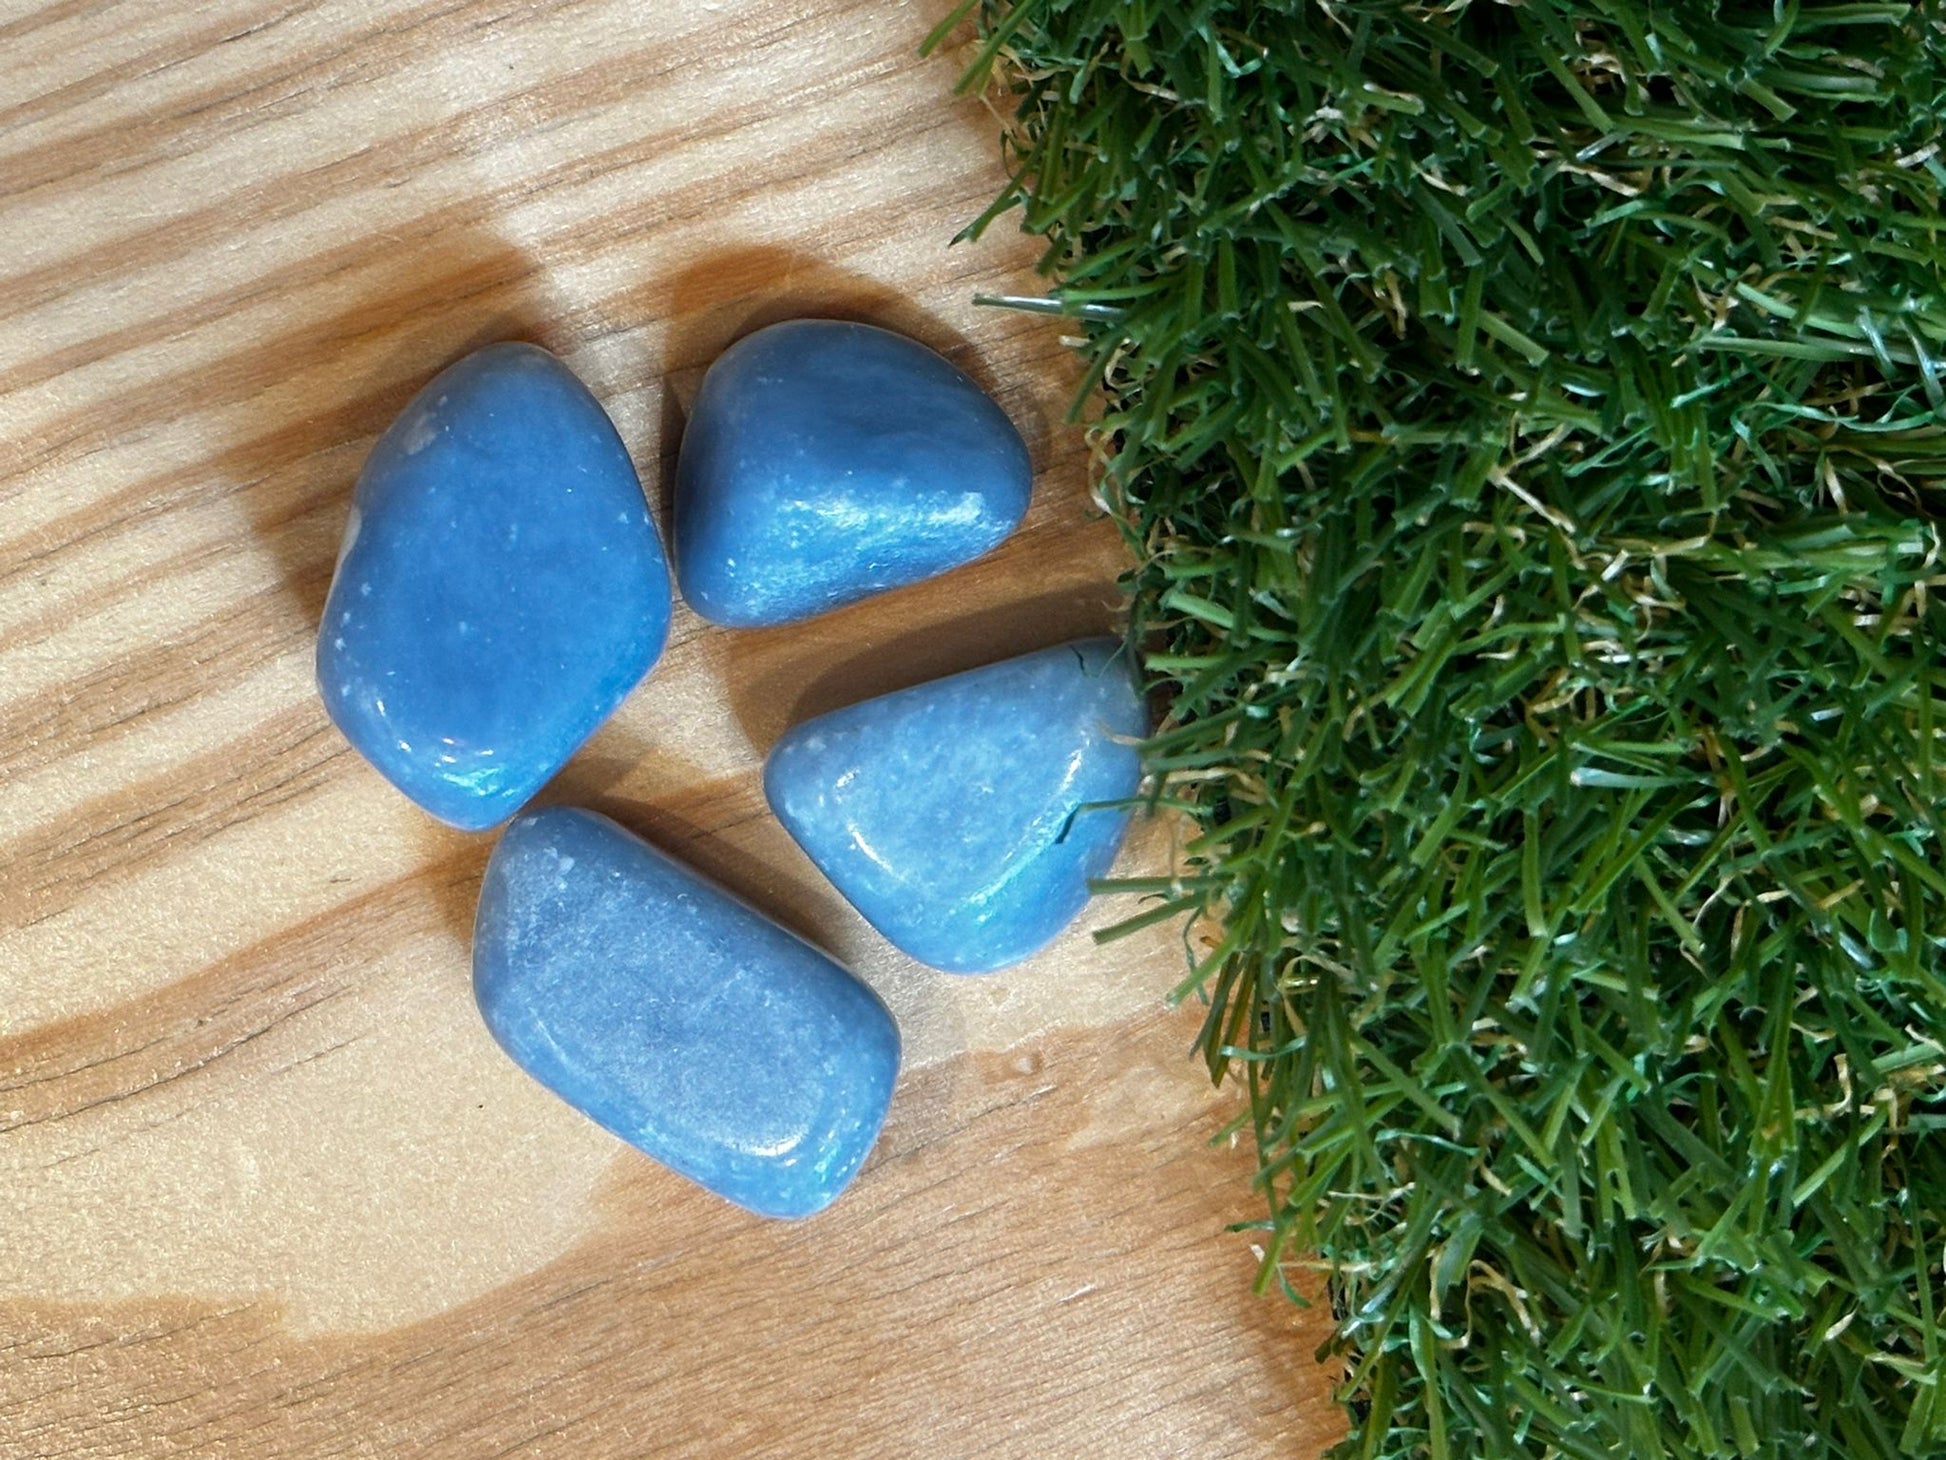 Blue Quartz Tumble Stone - The Stone of Spiritual Expansion - The Hare and the Moon